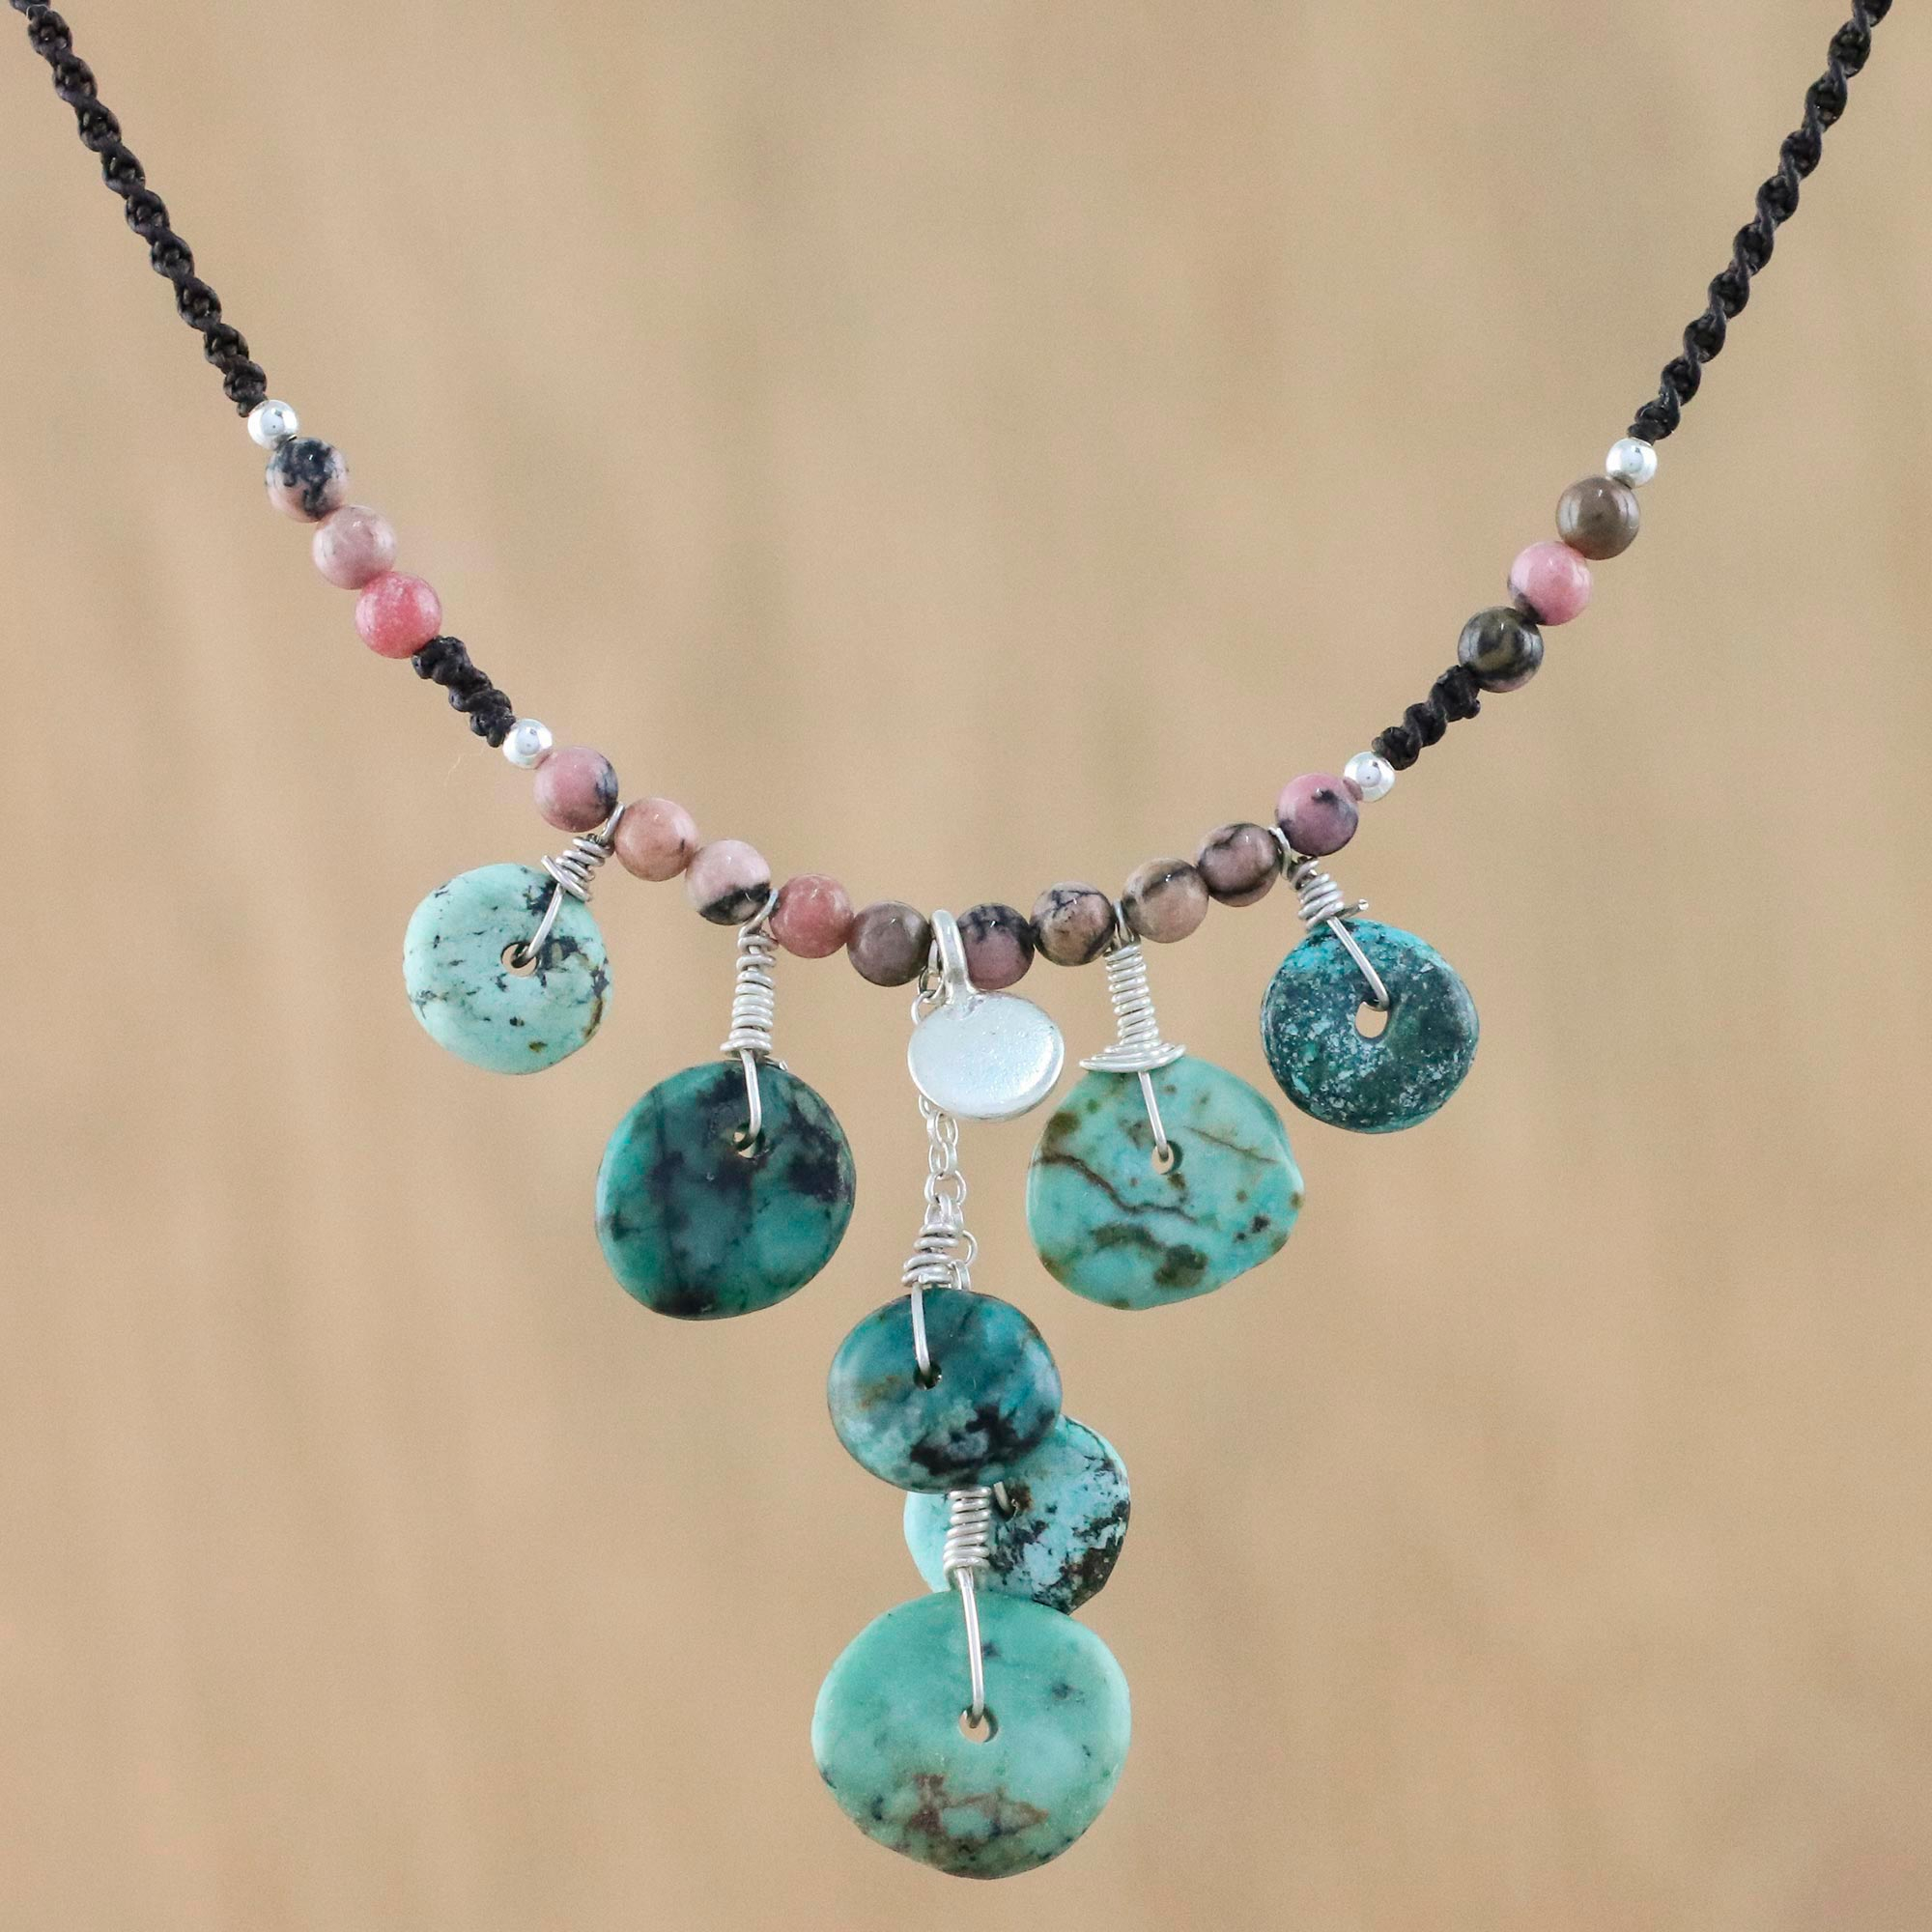 Natural stone necklace jewelry, Anniversary gift Designer Necklace beads Birthday gift Turquoise stone necklace